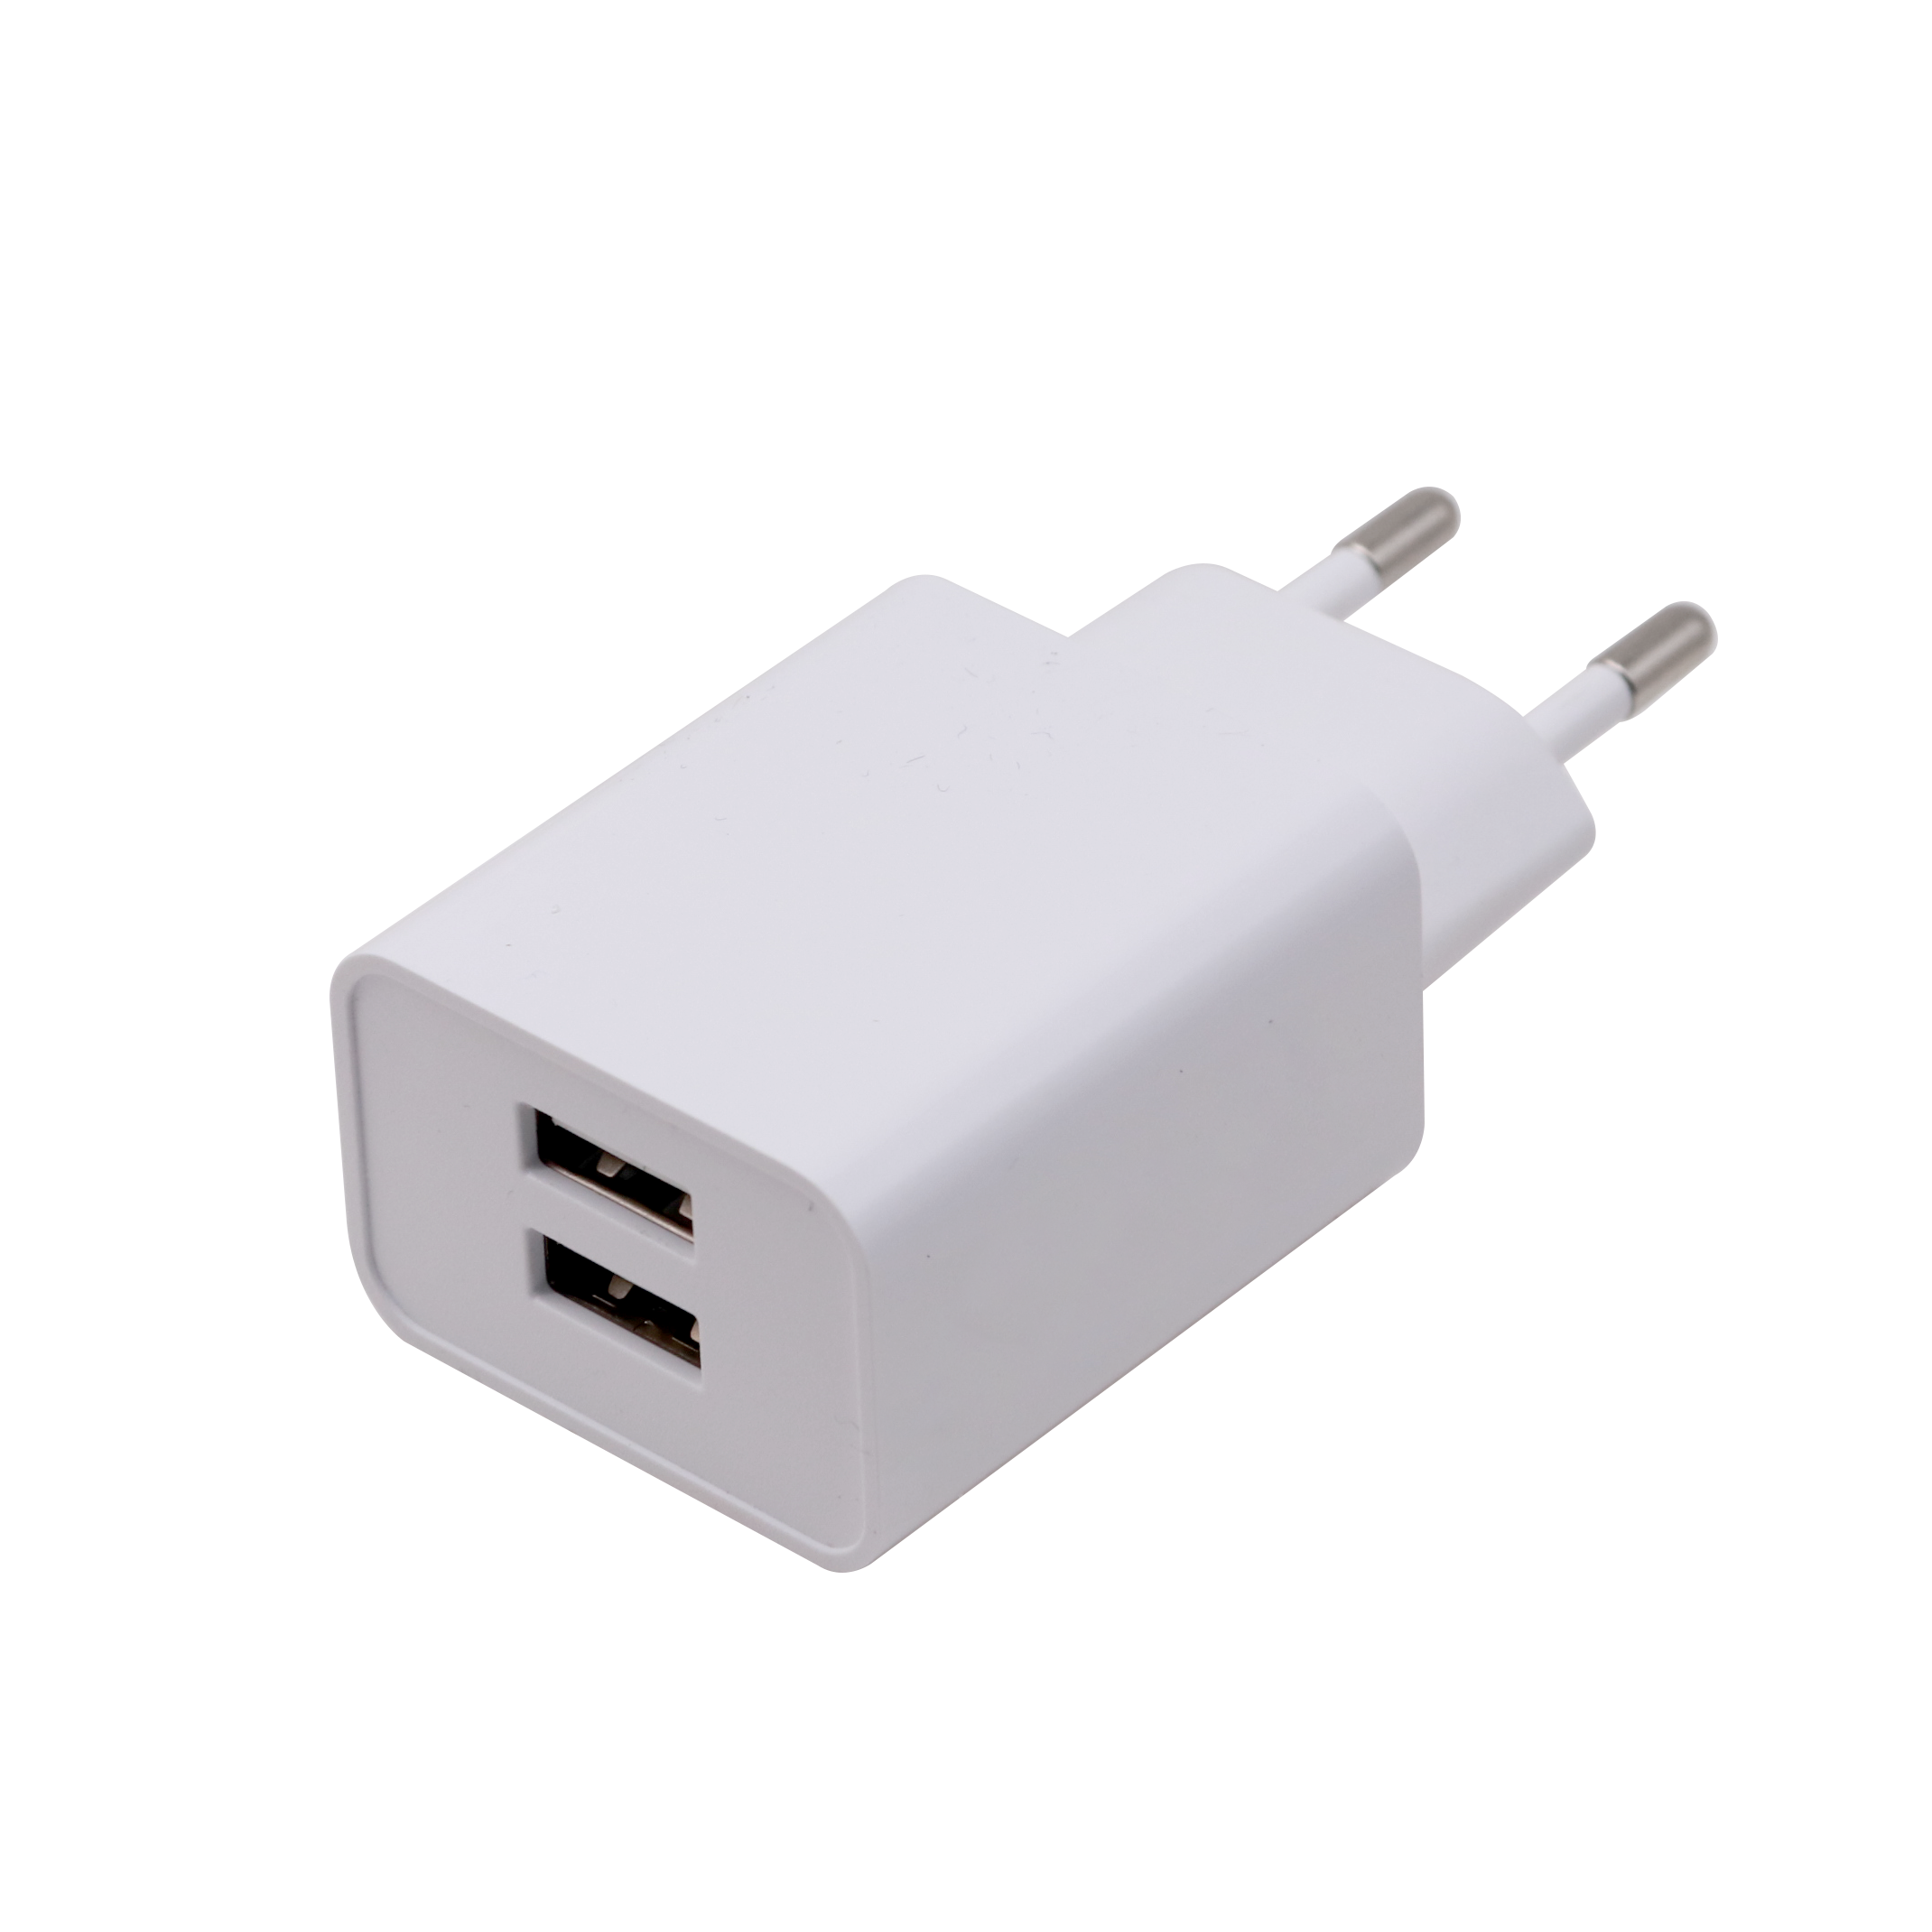 DAB686 Double USB Wall Charger